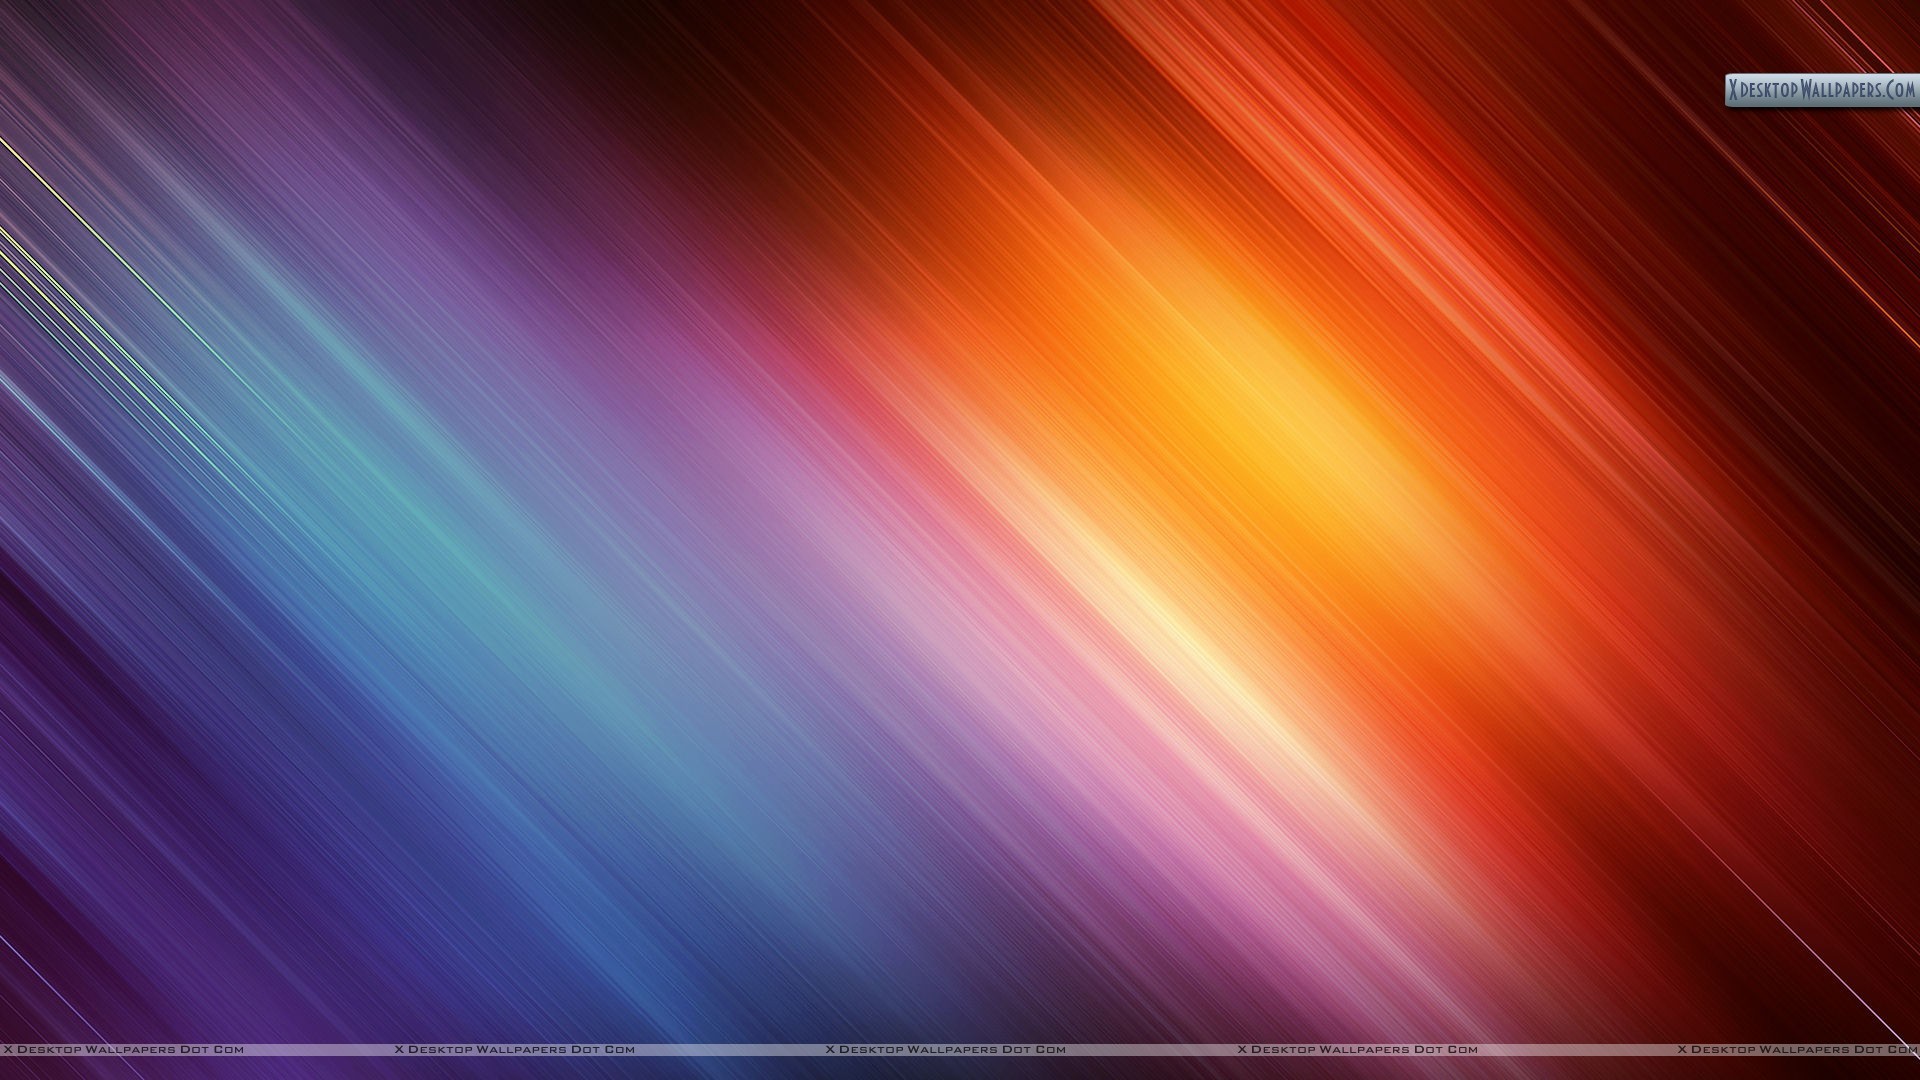 1920x1080 You are viewing wallpaper titled "Colourful Abstract ...